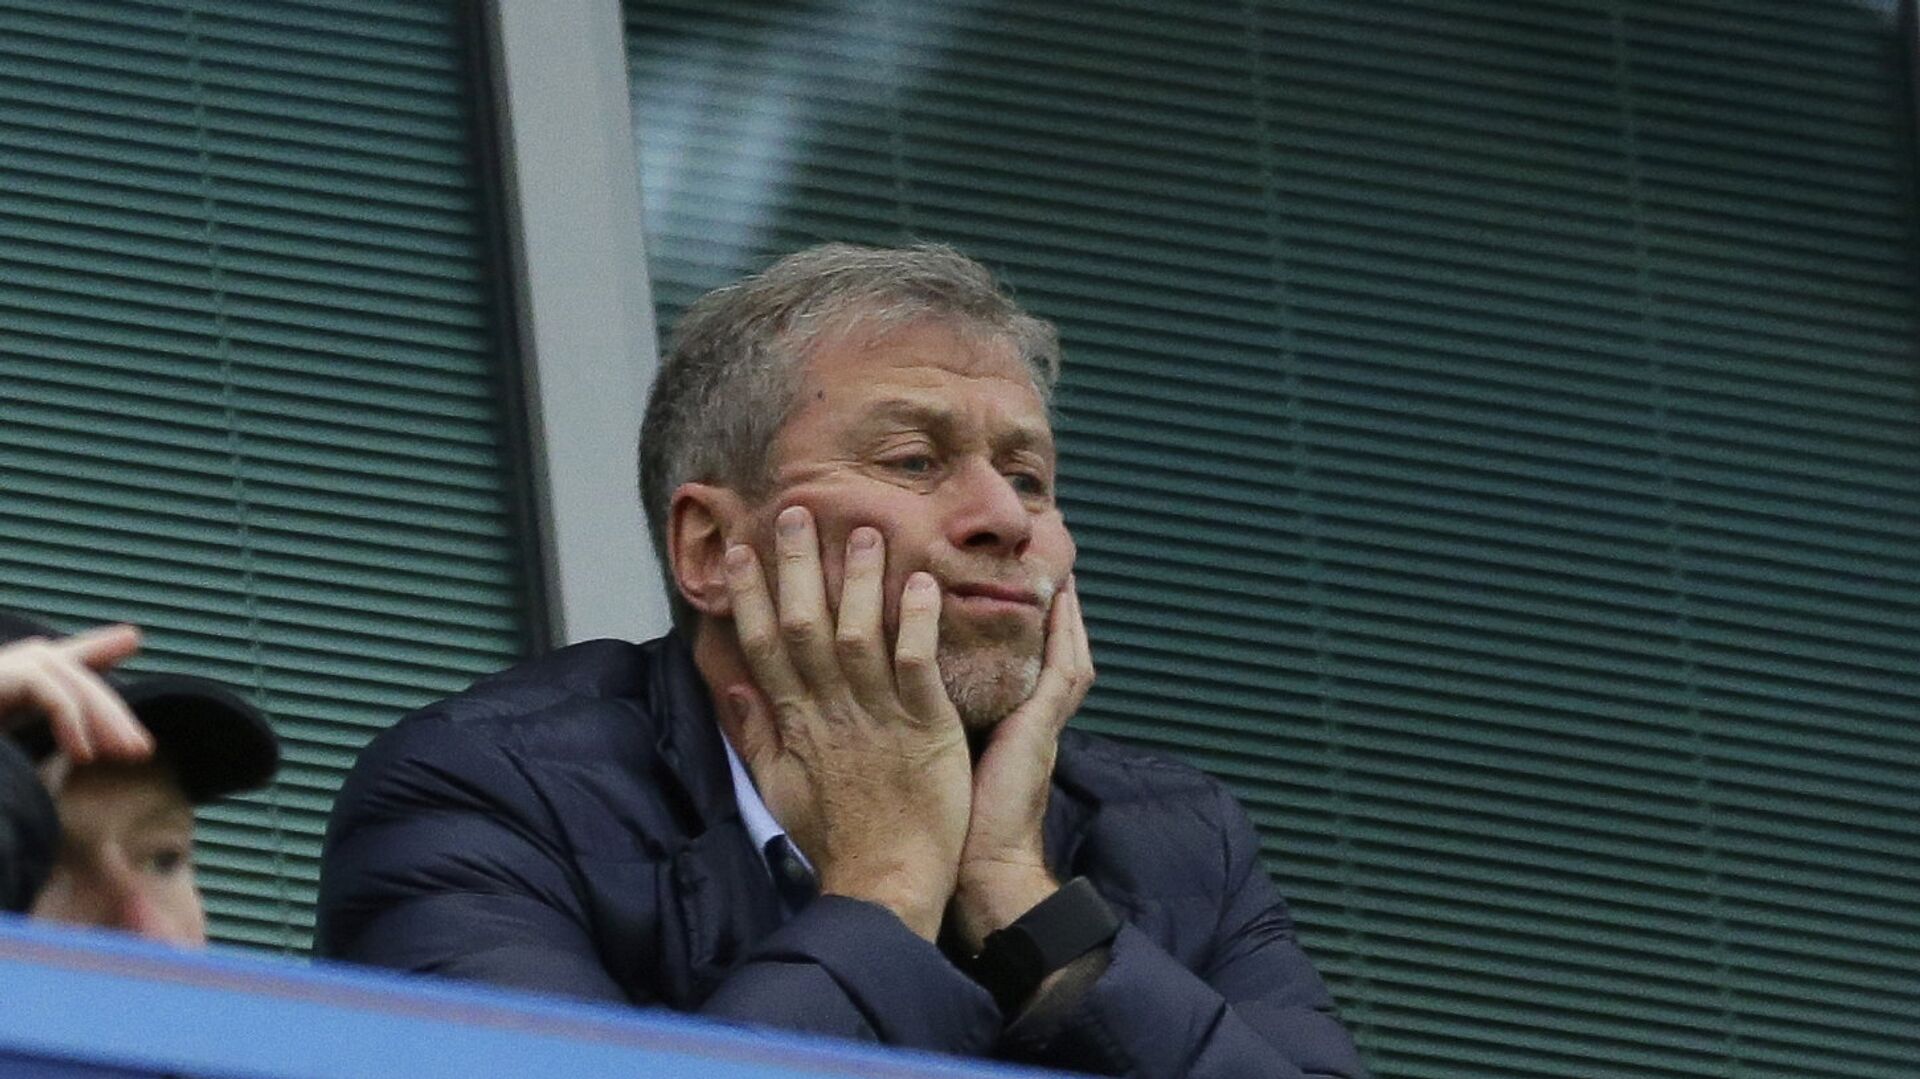 In this file photo dated Saturday, Dec. 19, 2015, Chelsea soccer club owner Roman Abramovich sits in his box before the English Premier League soccer match between Chelsea and Sunderland at Stamford Bridge stadium in London. Russian billionaire Roman Abramovich has received Israeli citizenship after his British visa has not been renewed. An Israeli Immigration and Absorption Ministry official says the Chelsea soccer club owner arrived in Israel Monday and was granted citizenship in accordance with an Israeli law granting that right to people of Jewish descent - اسپوتنیک افغانستان  , 1920, 15.03.2022